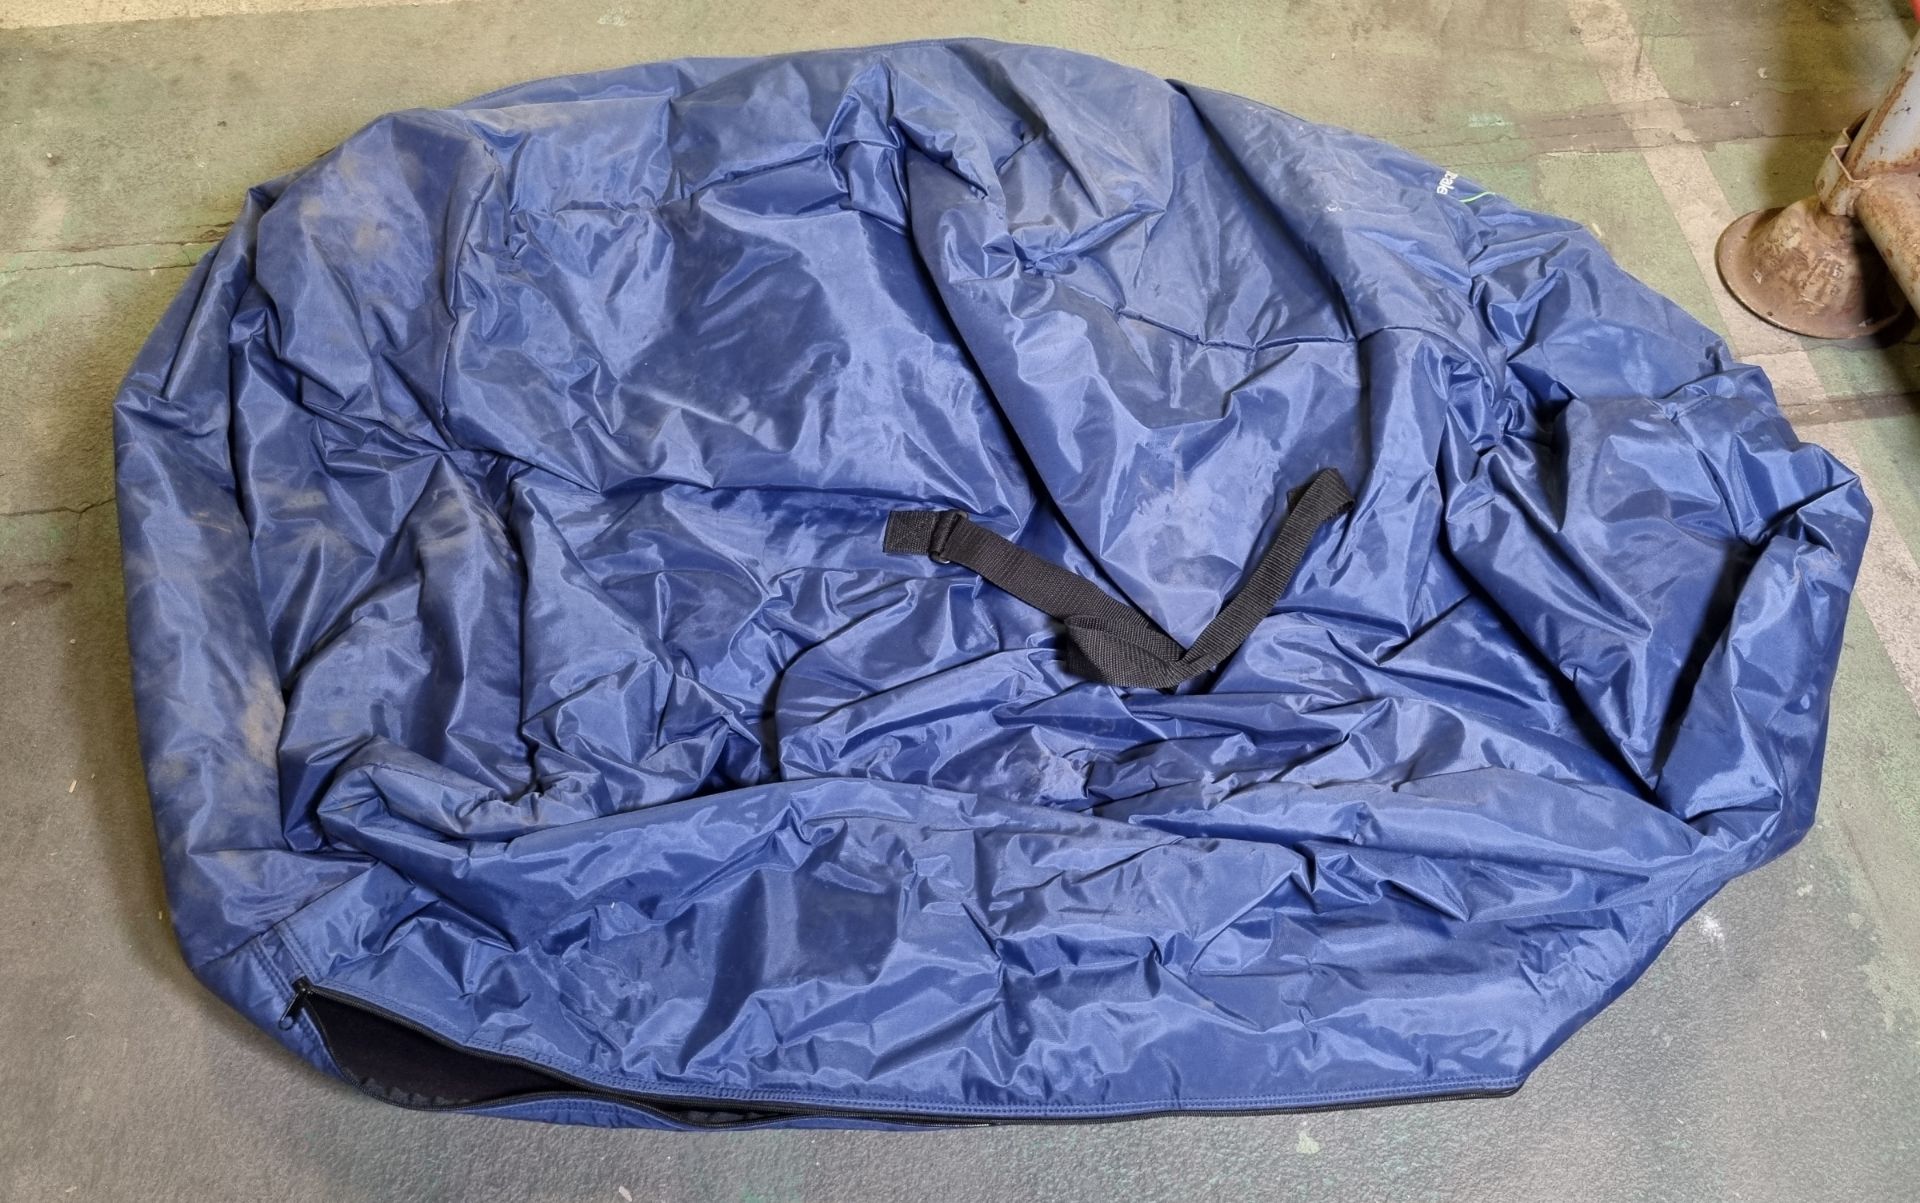 6x Blue Humanscale carry bags - Image 2 of 3